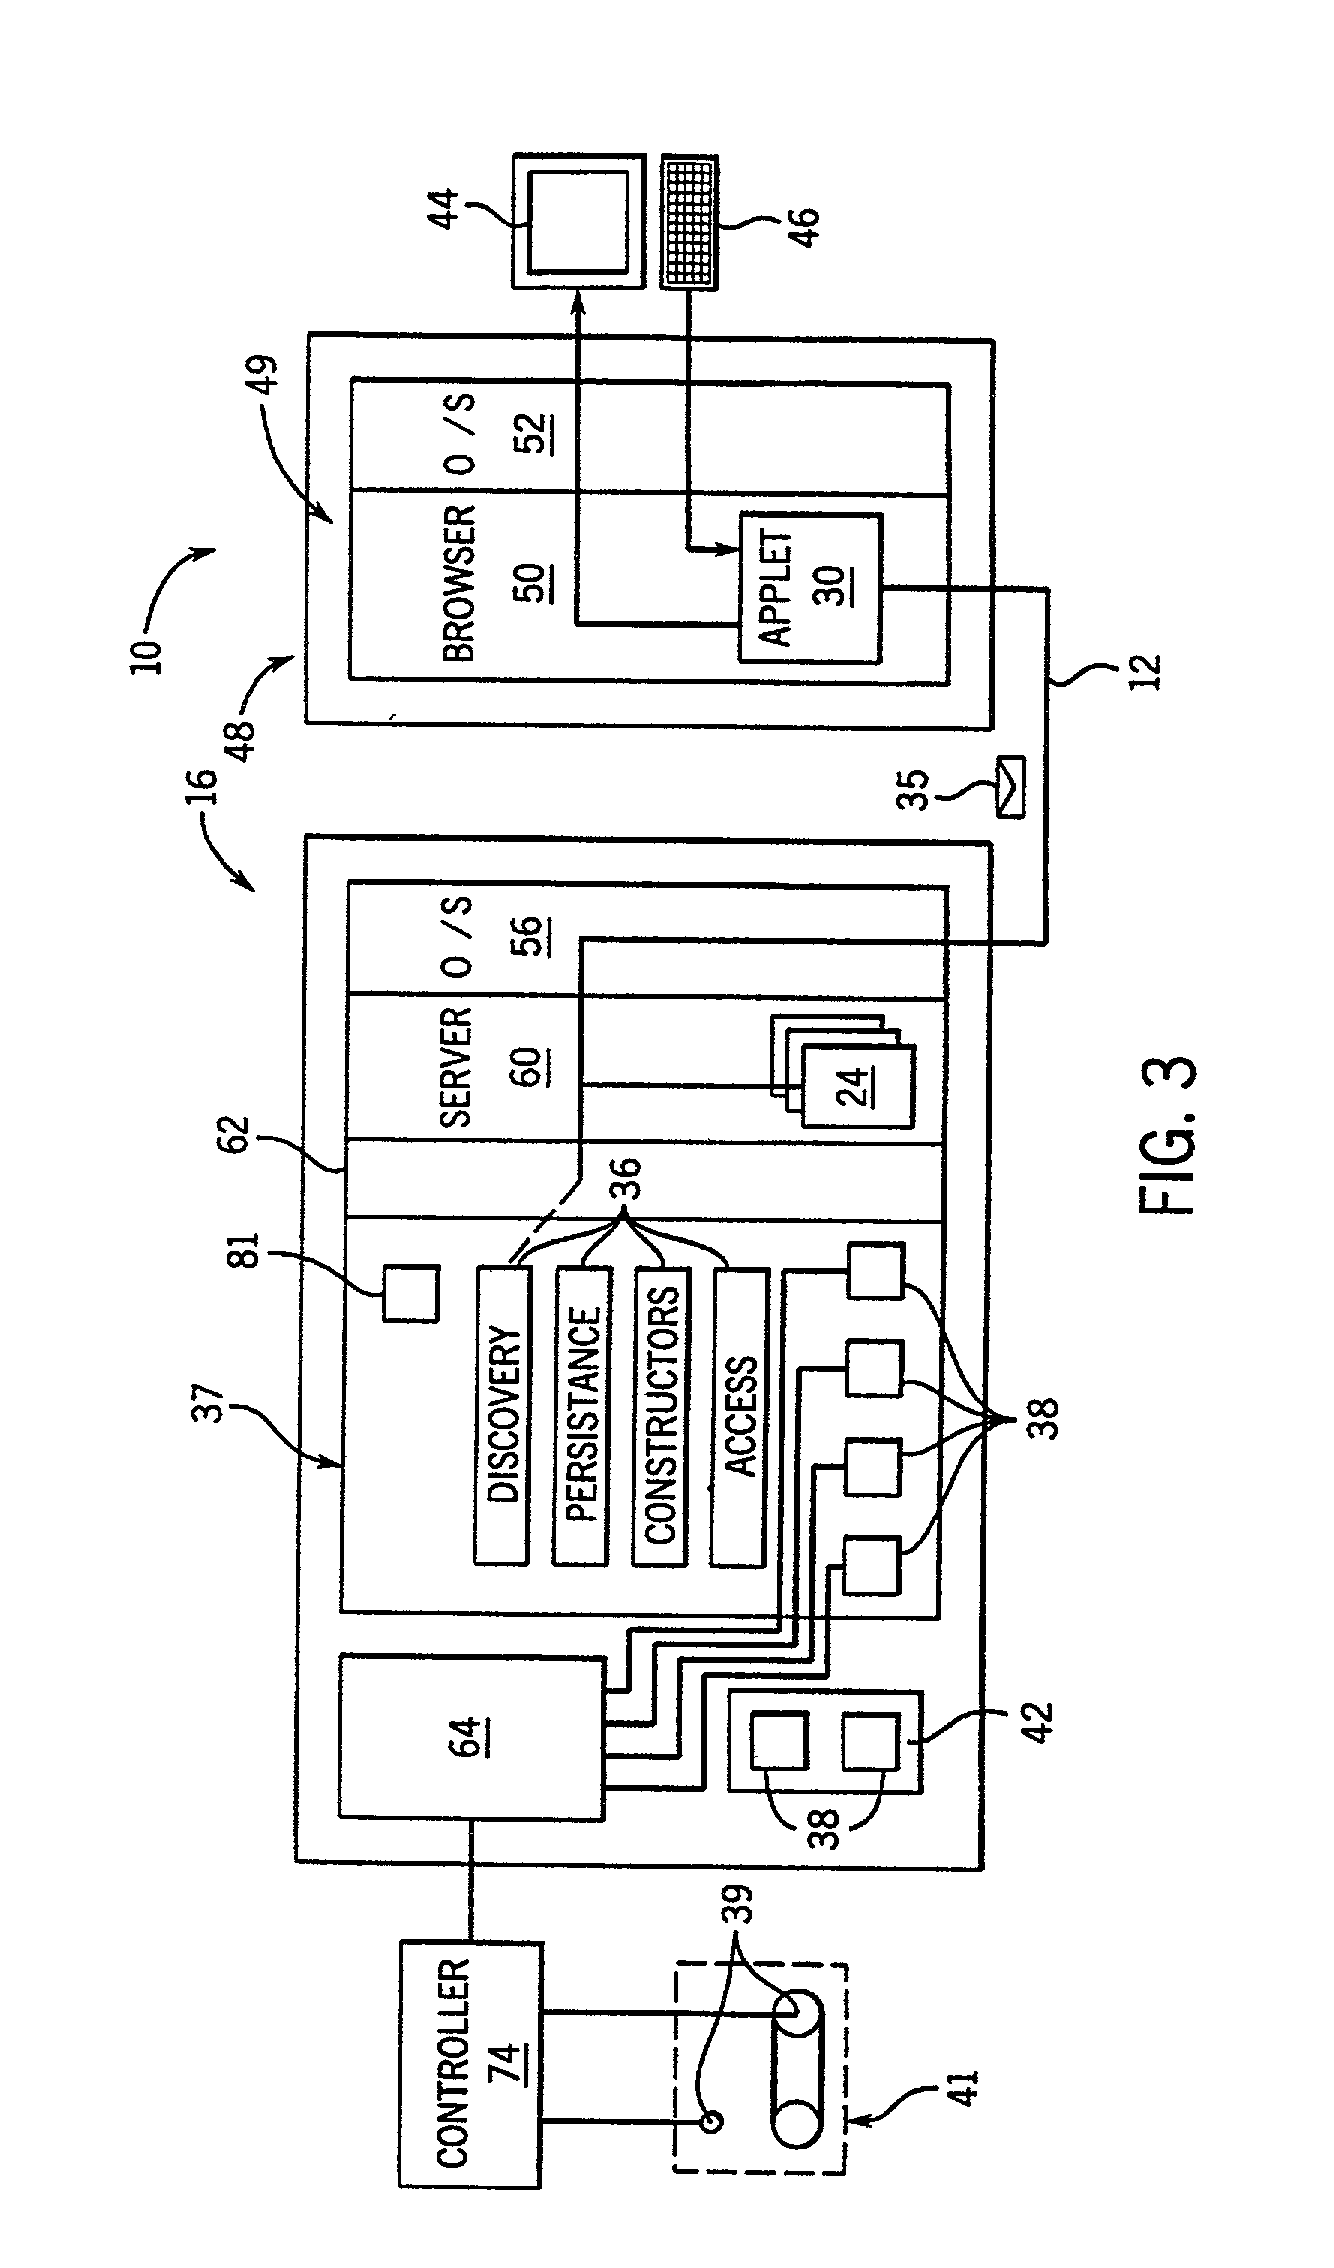 Industrial controller interface providing standardized object access